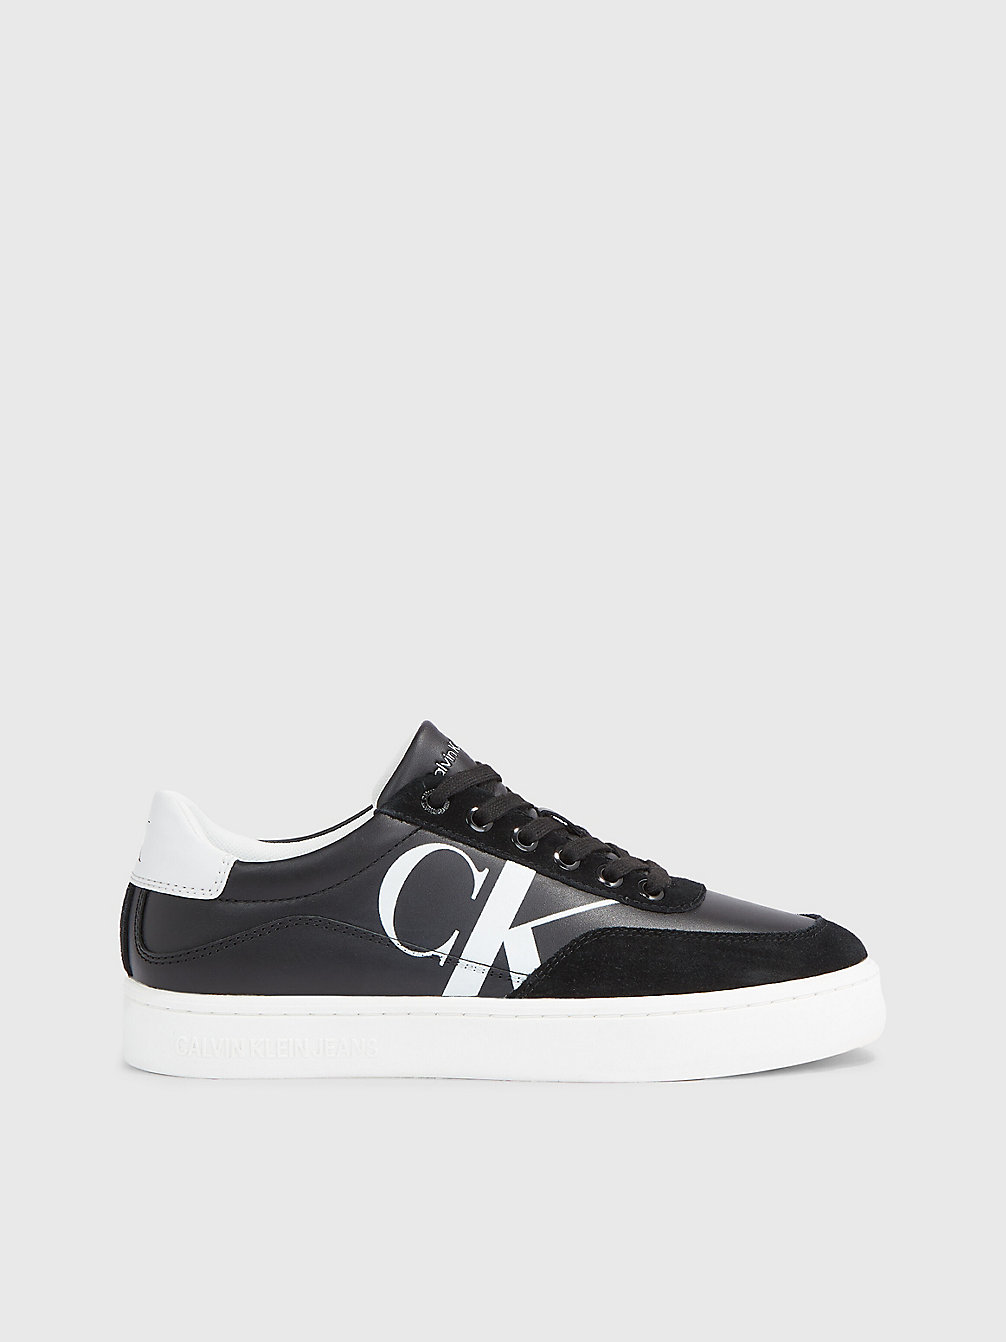 BLACK/BRIGHT WHITE/SILVER Leather Trainers undefined women Calvin Klein